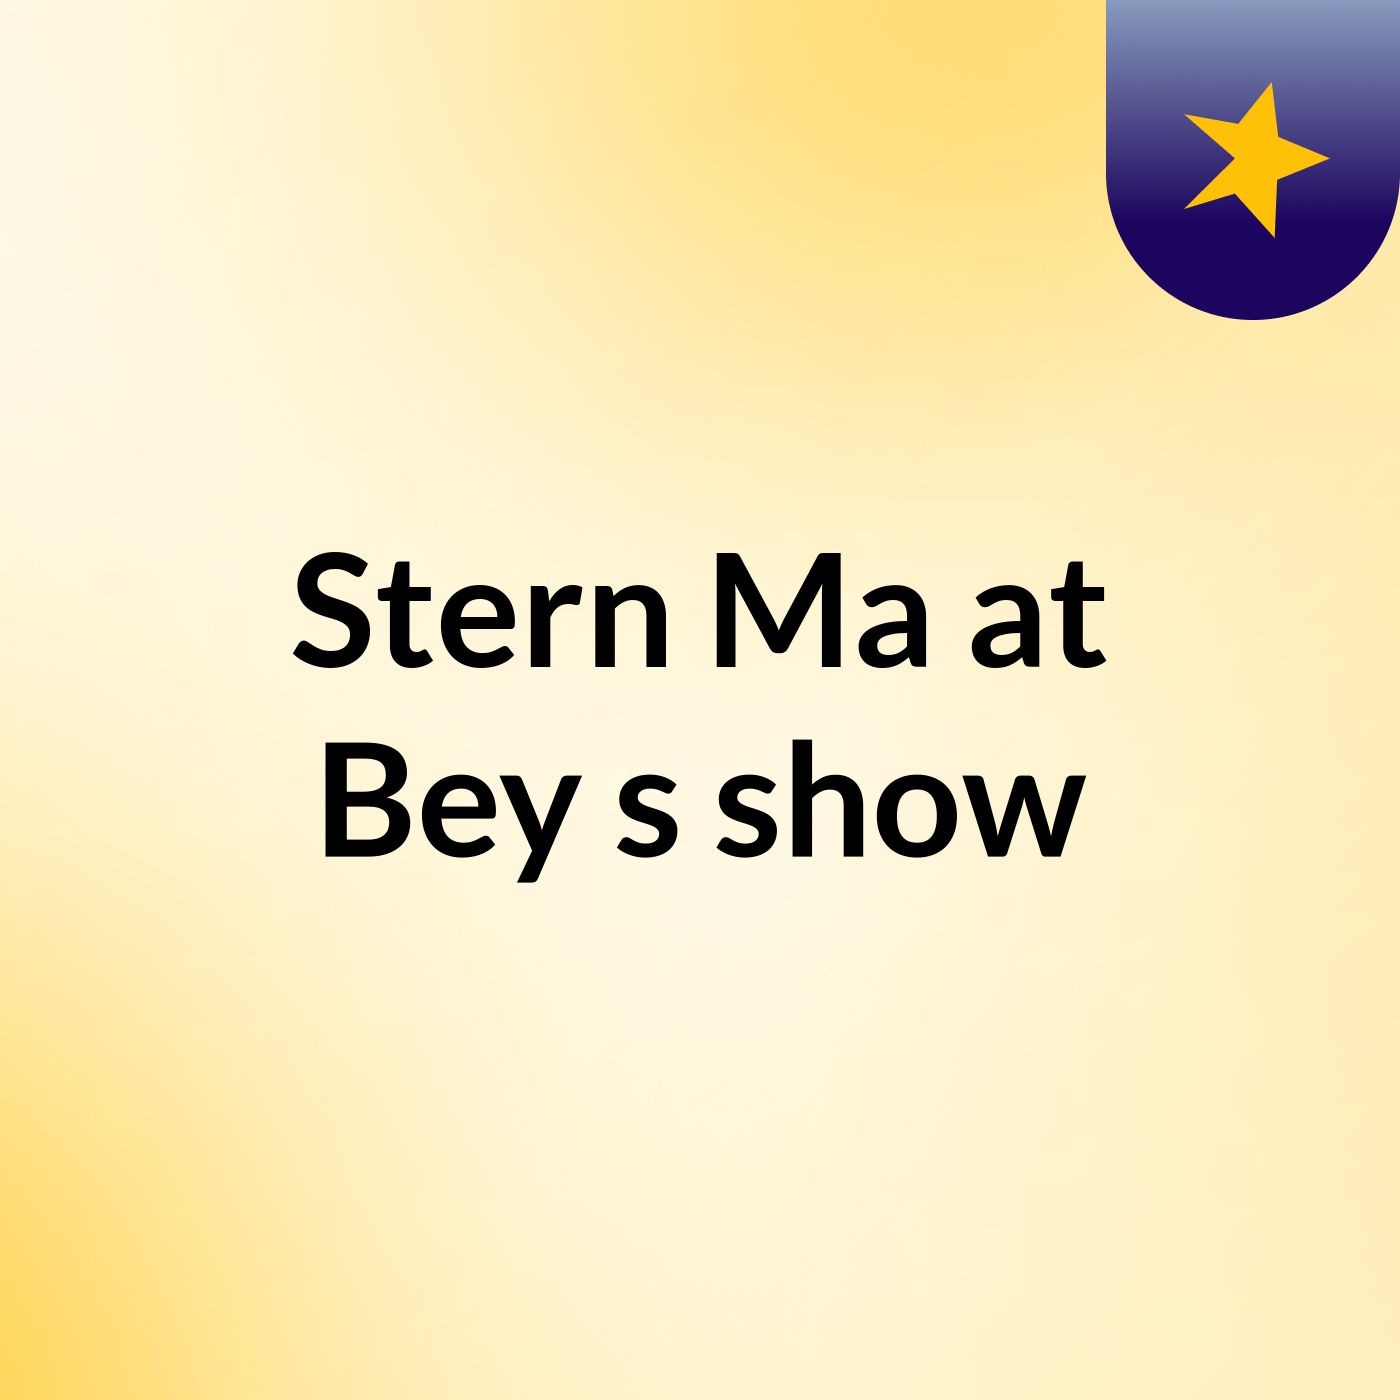 Stern Ma'at Bey's show